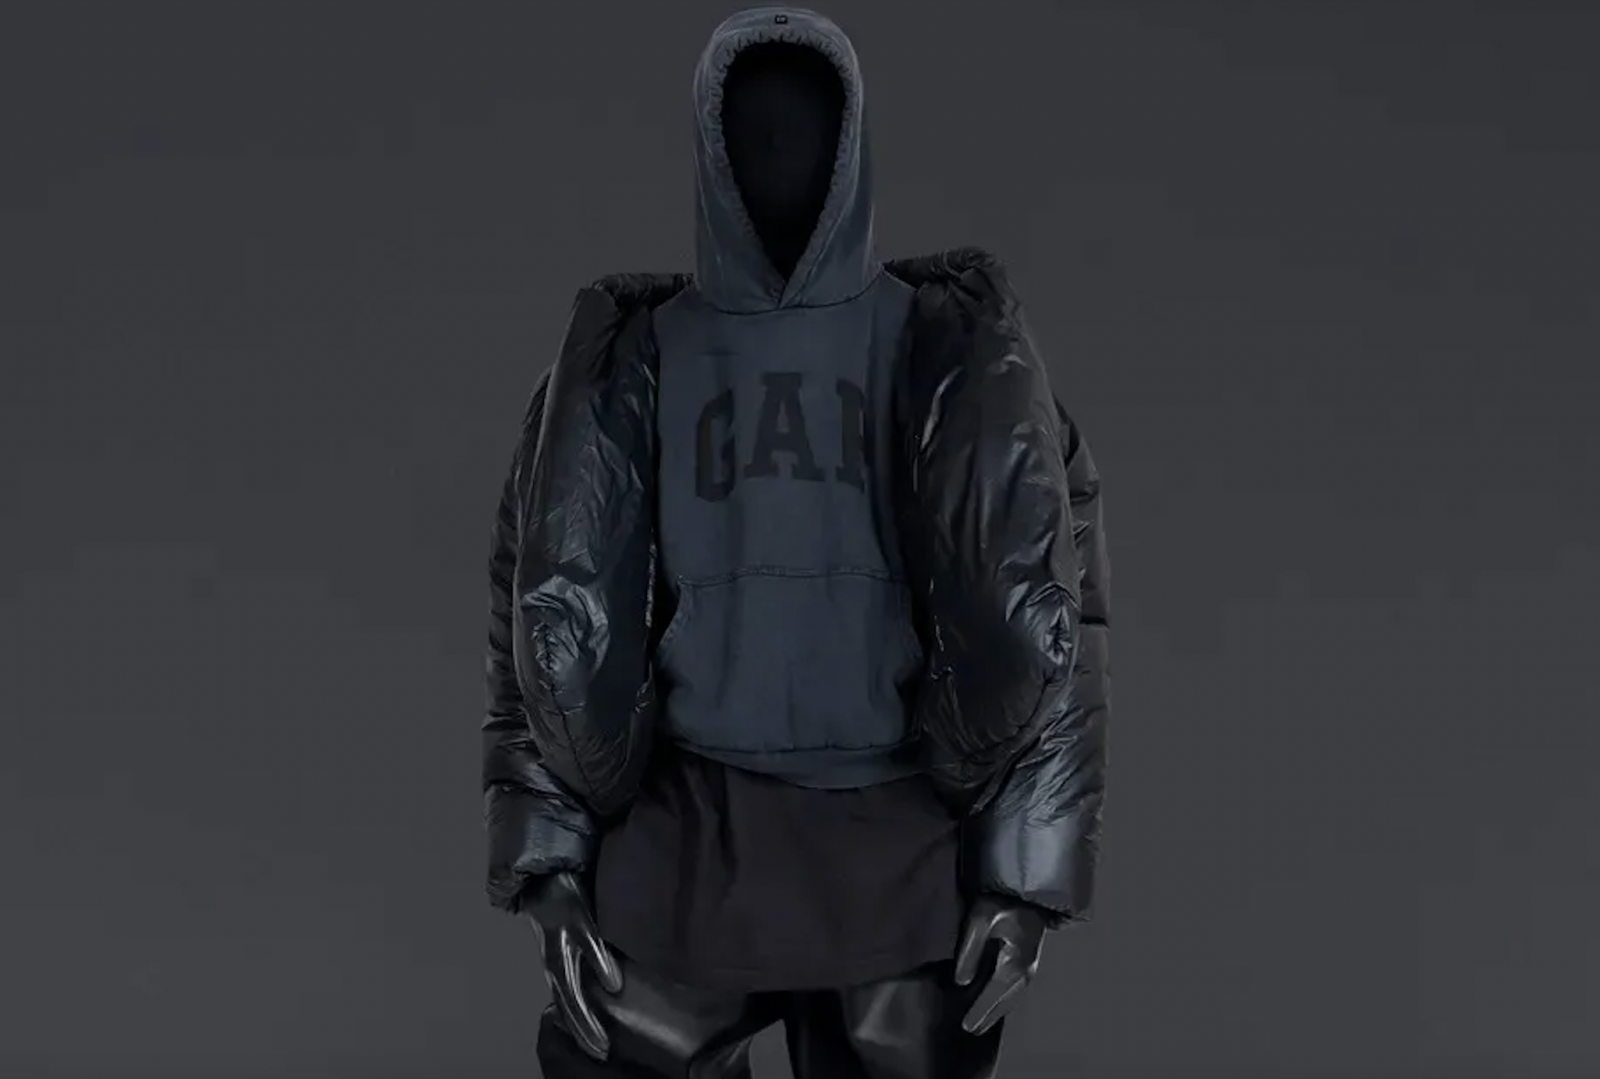 A styled look from the Yeezy Gap collection